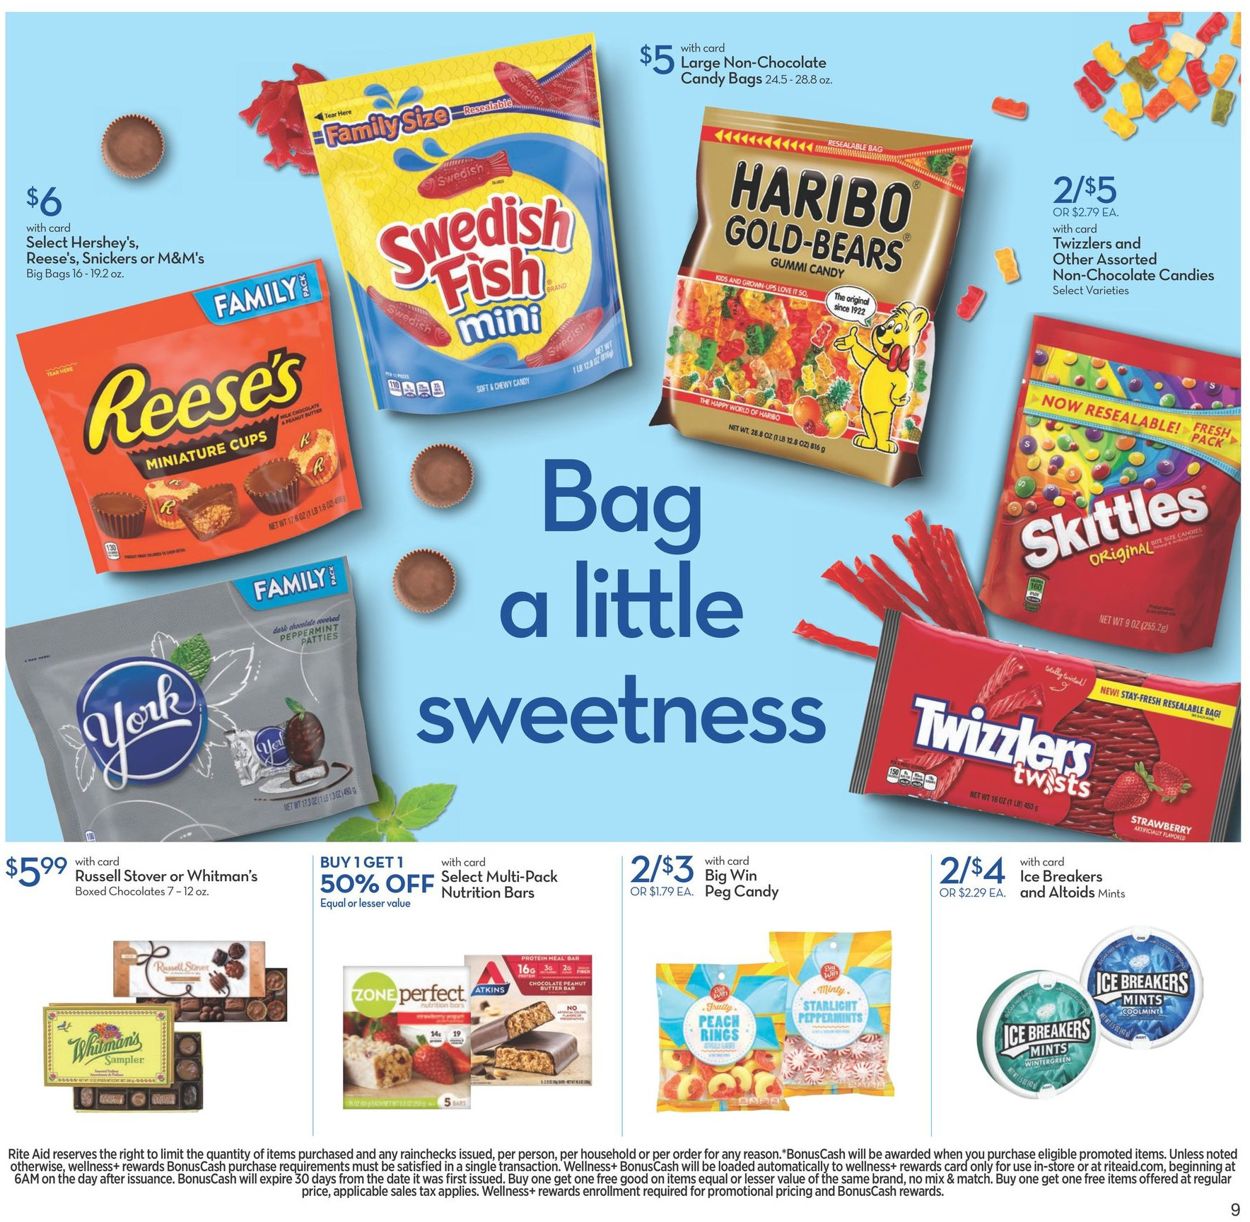 Rite Aid Christmas Current weekly ad 12/27 01/02/2021 [9] frequent